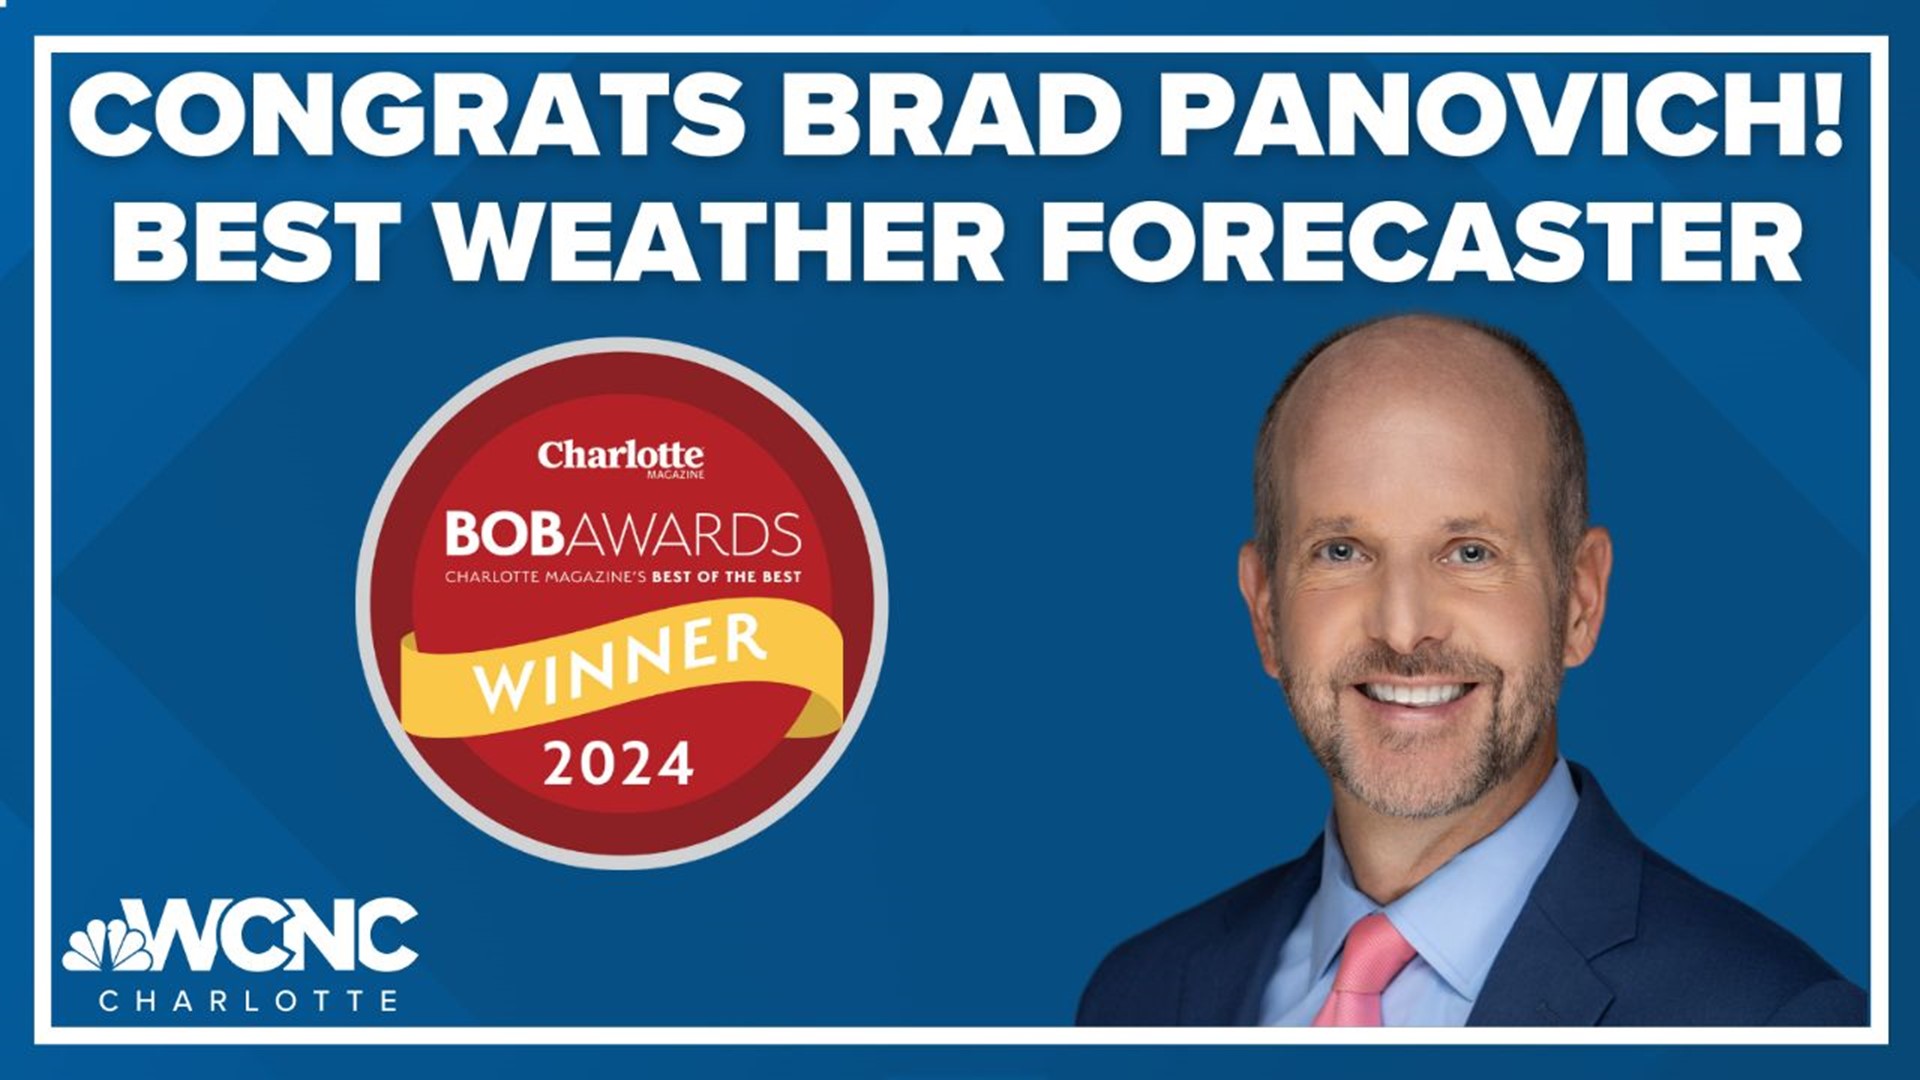 Brad Panovich was voted "Best Weather Forecaster" in Charlotte magazine's Best of the Best awards.